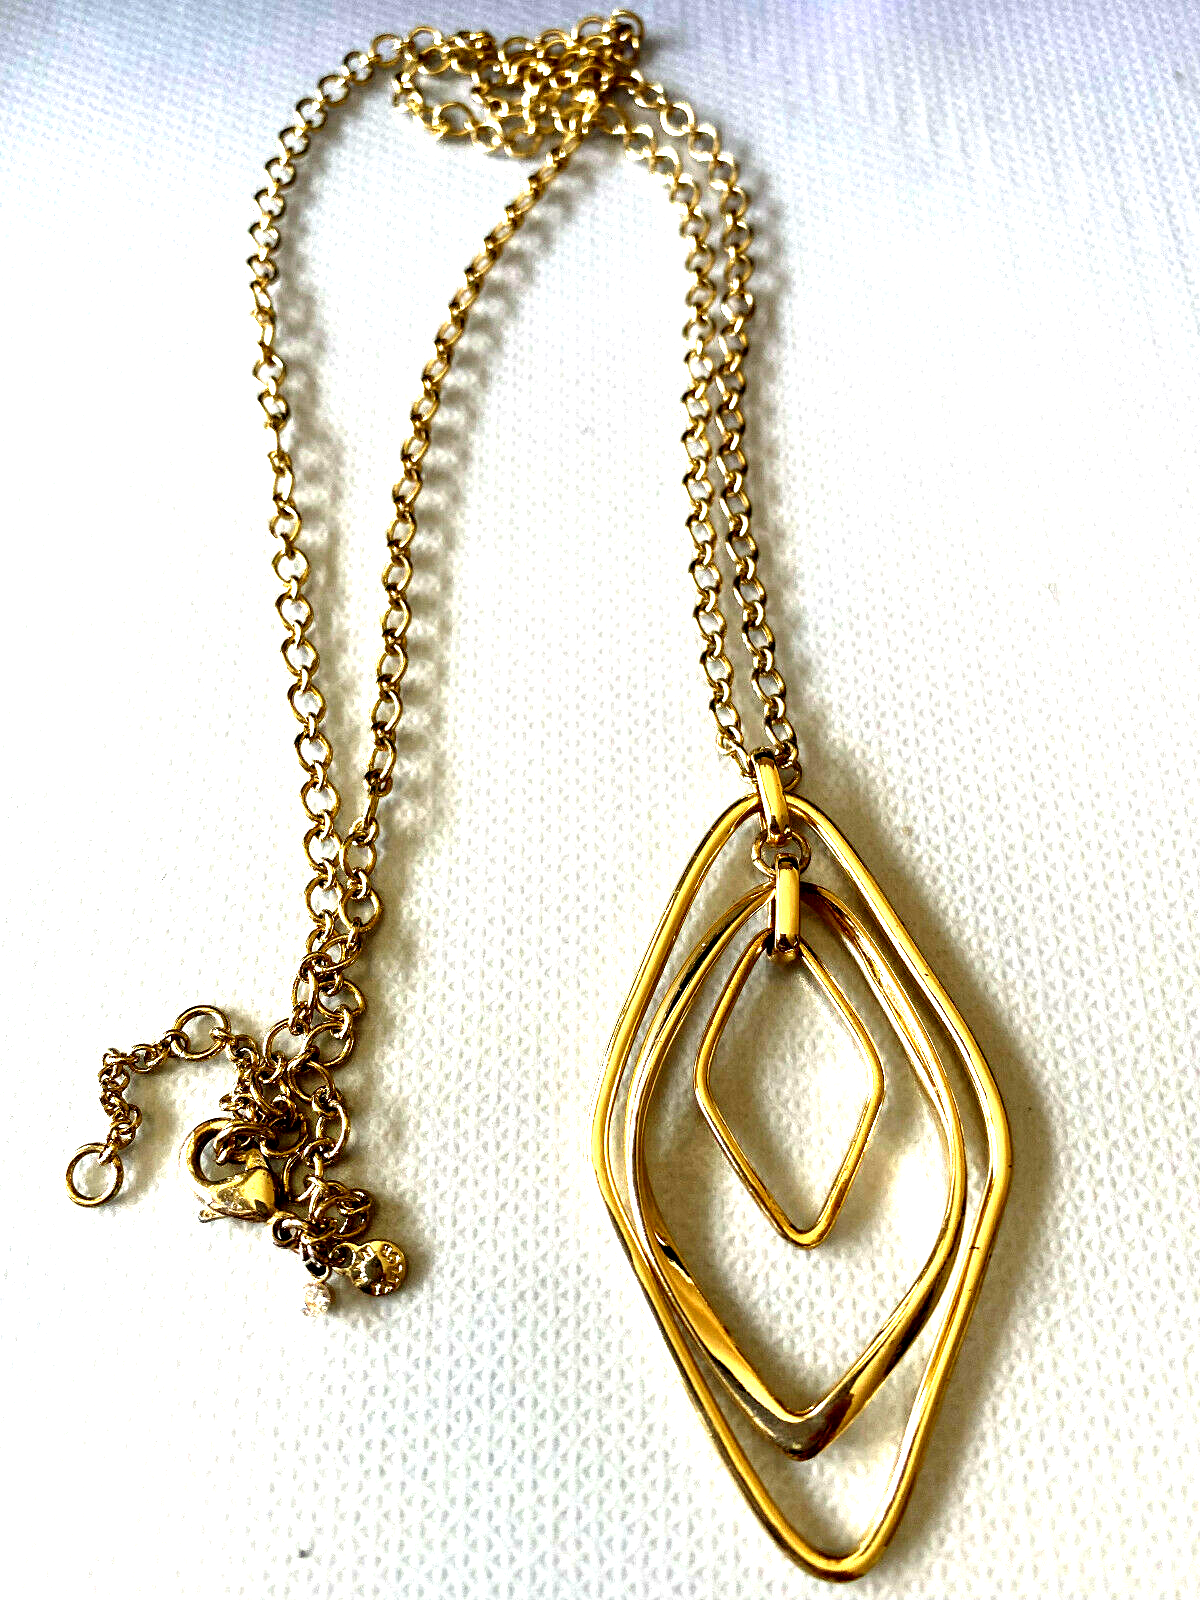 Primary image for Ann Taylor loft Gold Tone Chain Necklace with Square Pendants